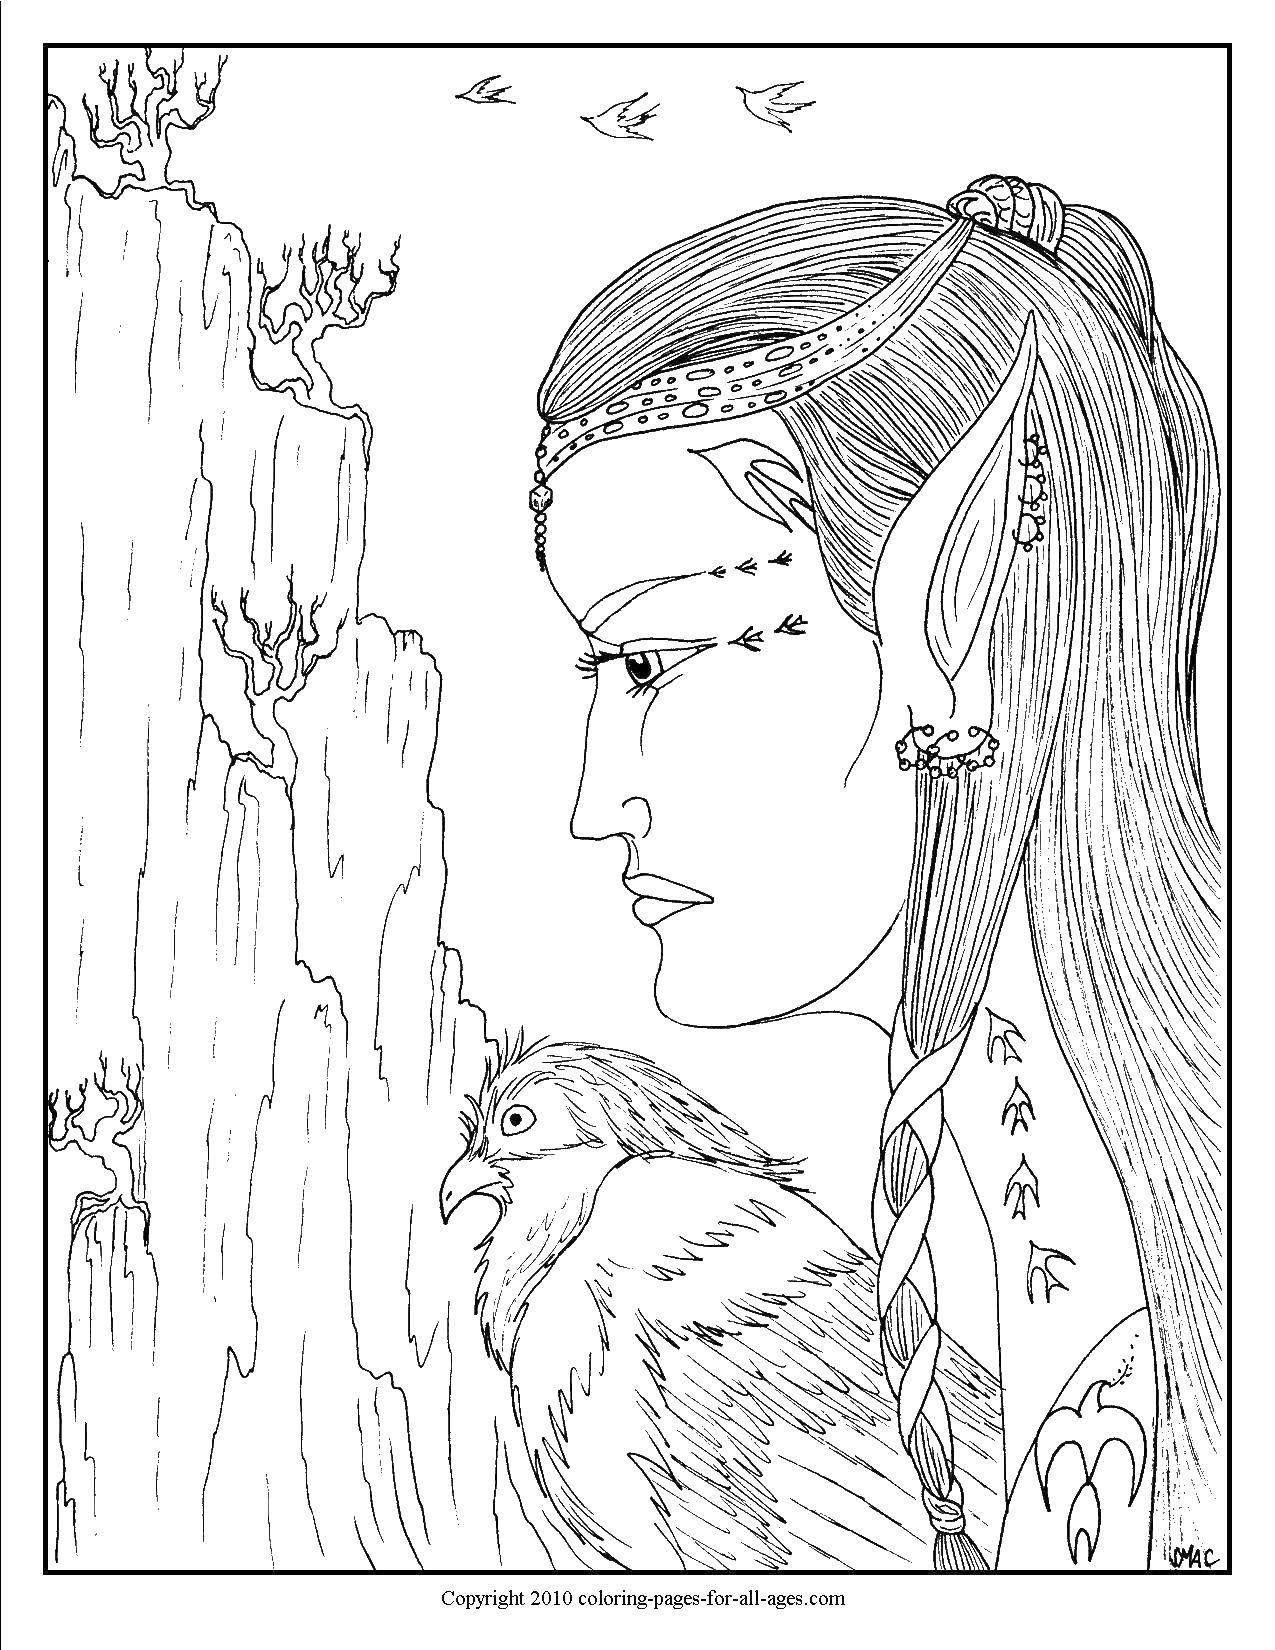 Coloring Elf with a bird. Category coloring pages for girls. Tags:  elf, bird, Falcon.